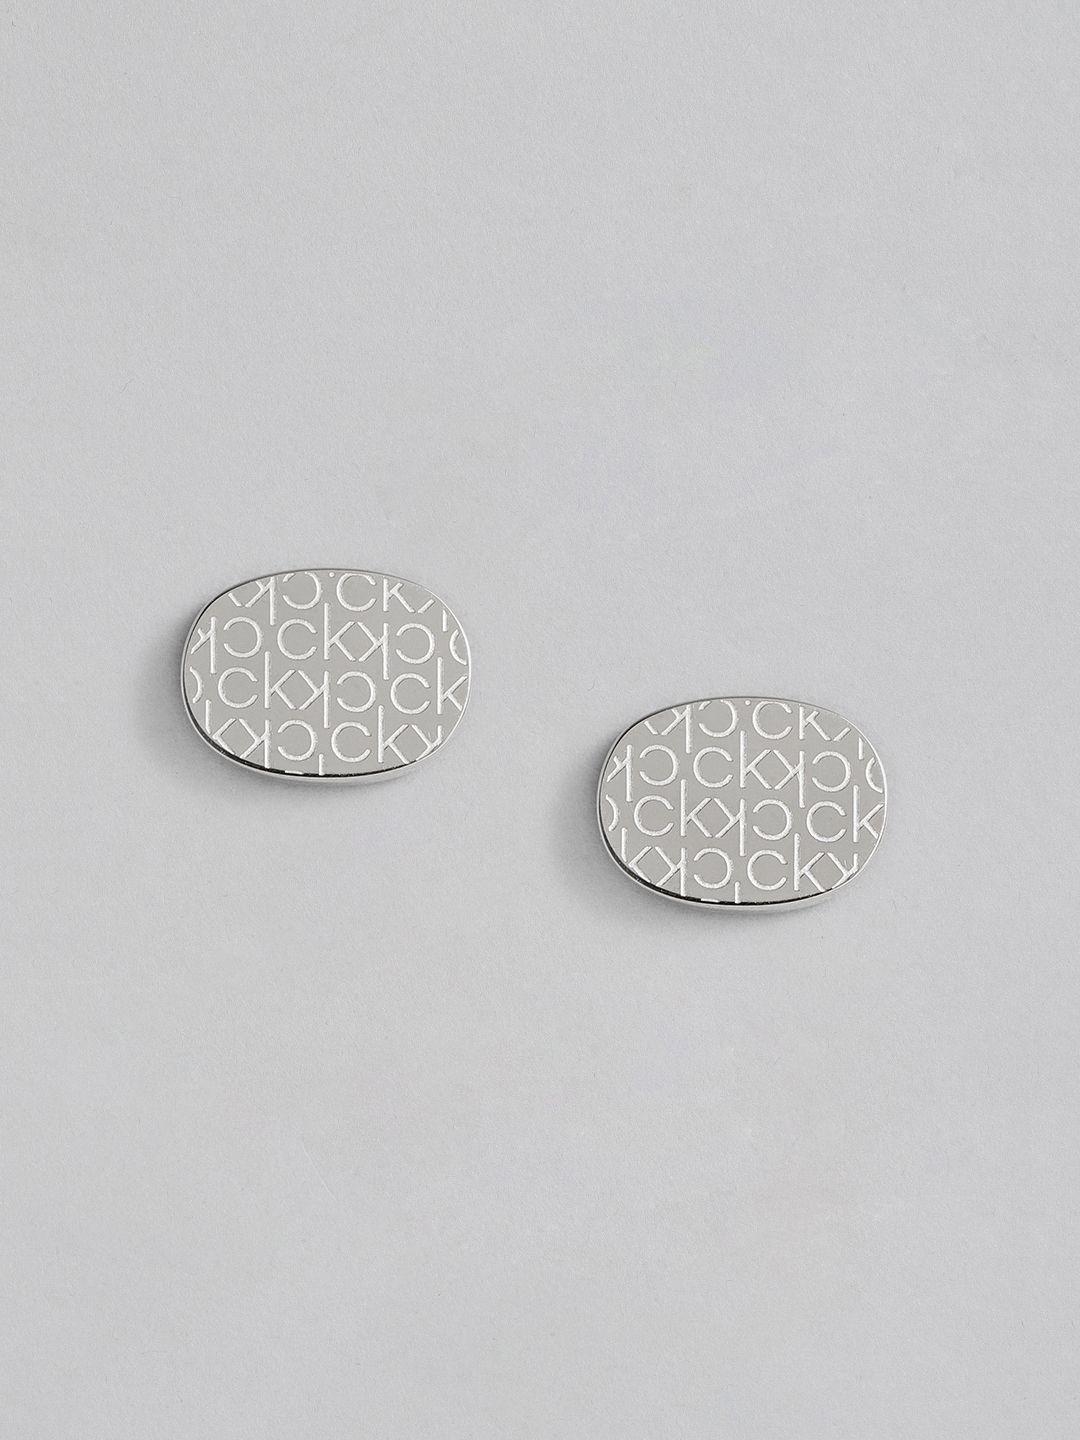 calvin-klein-brand-logo-print-brass-plated-stainless-steel-oval-shaped-studs